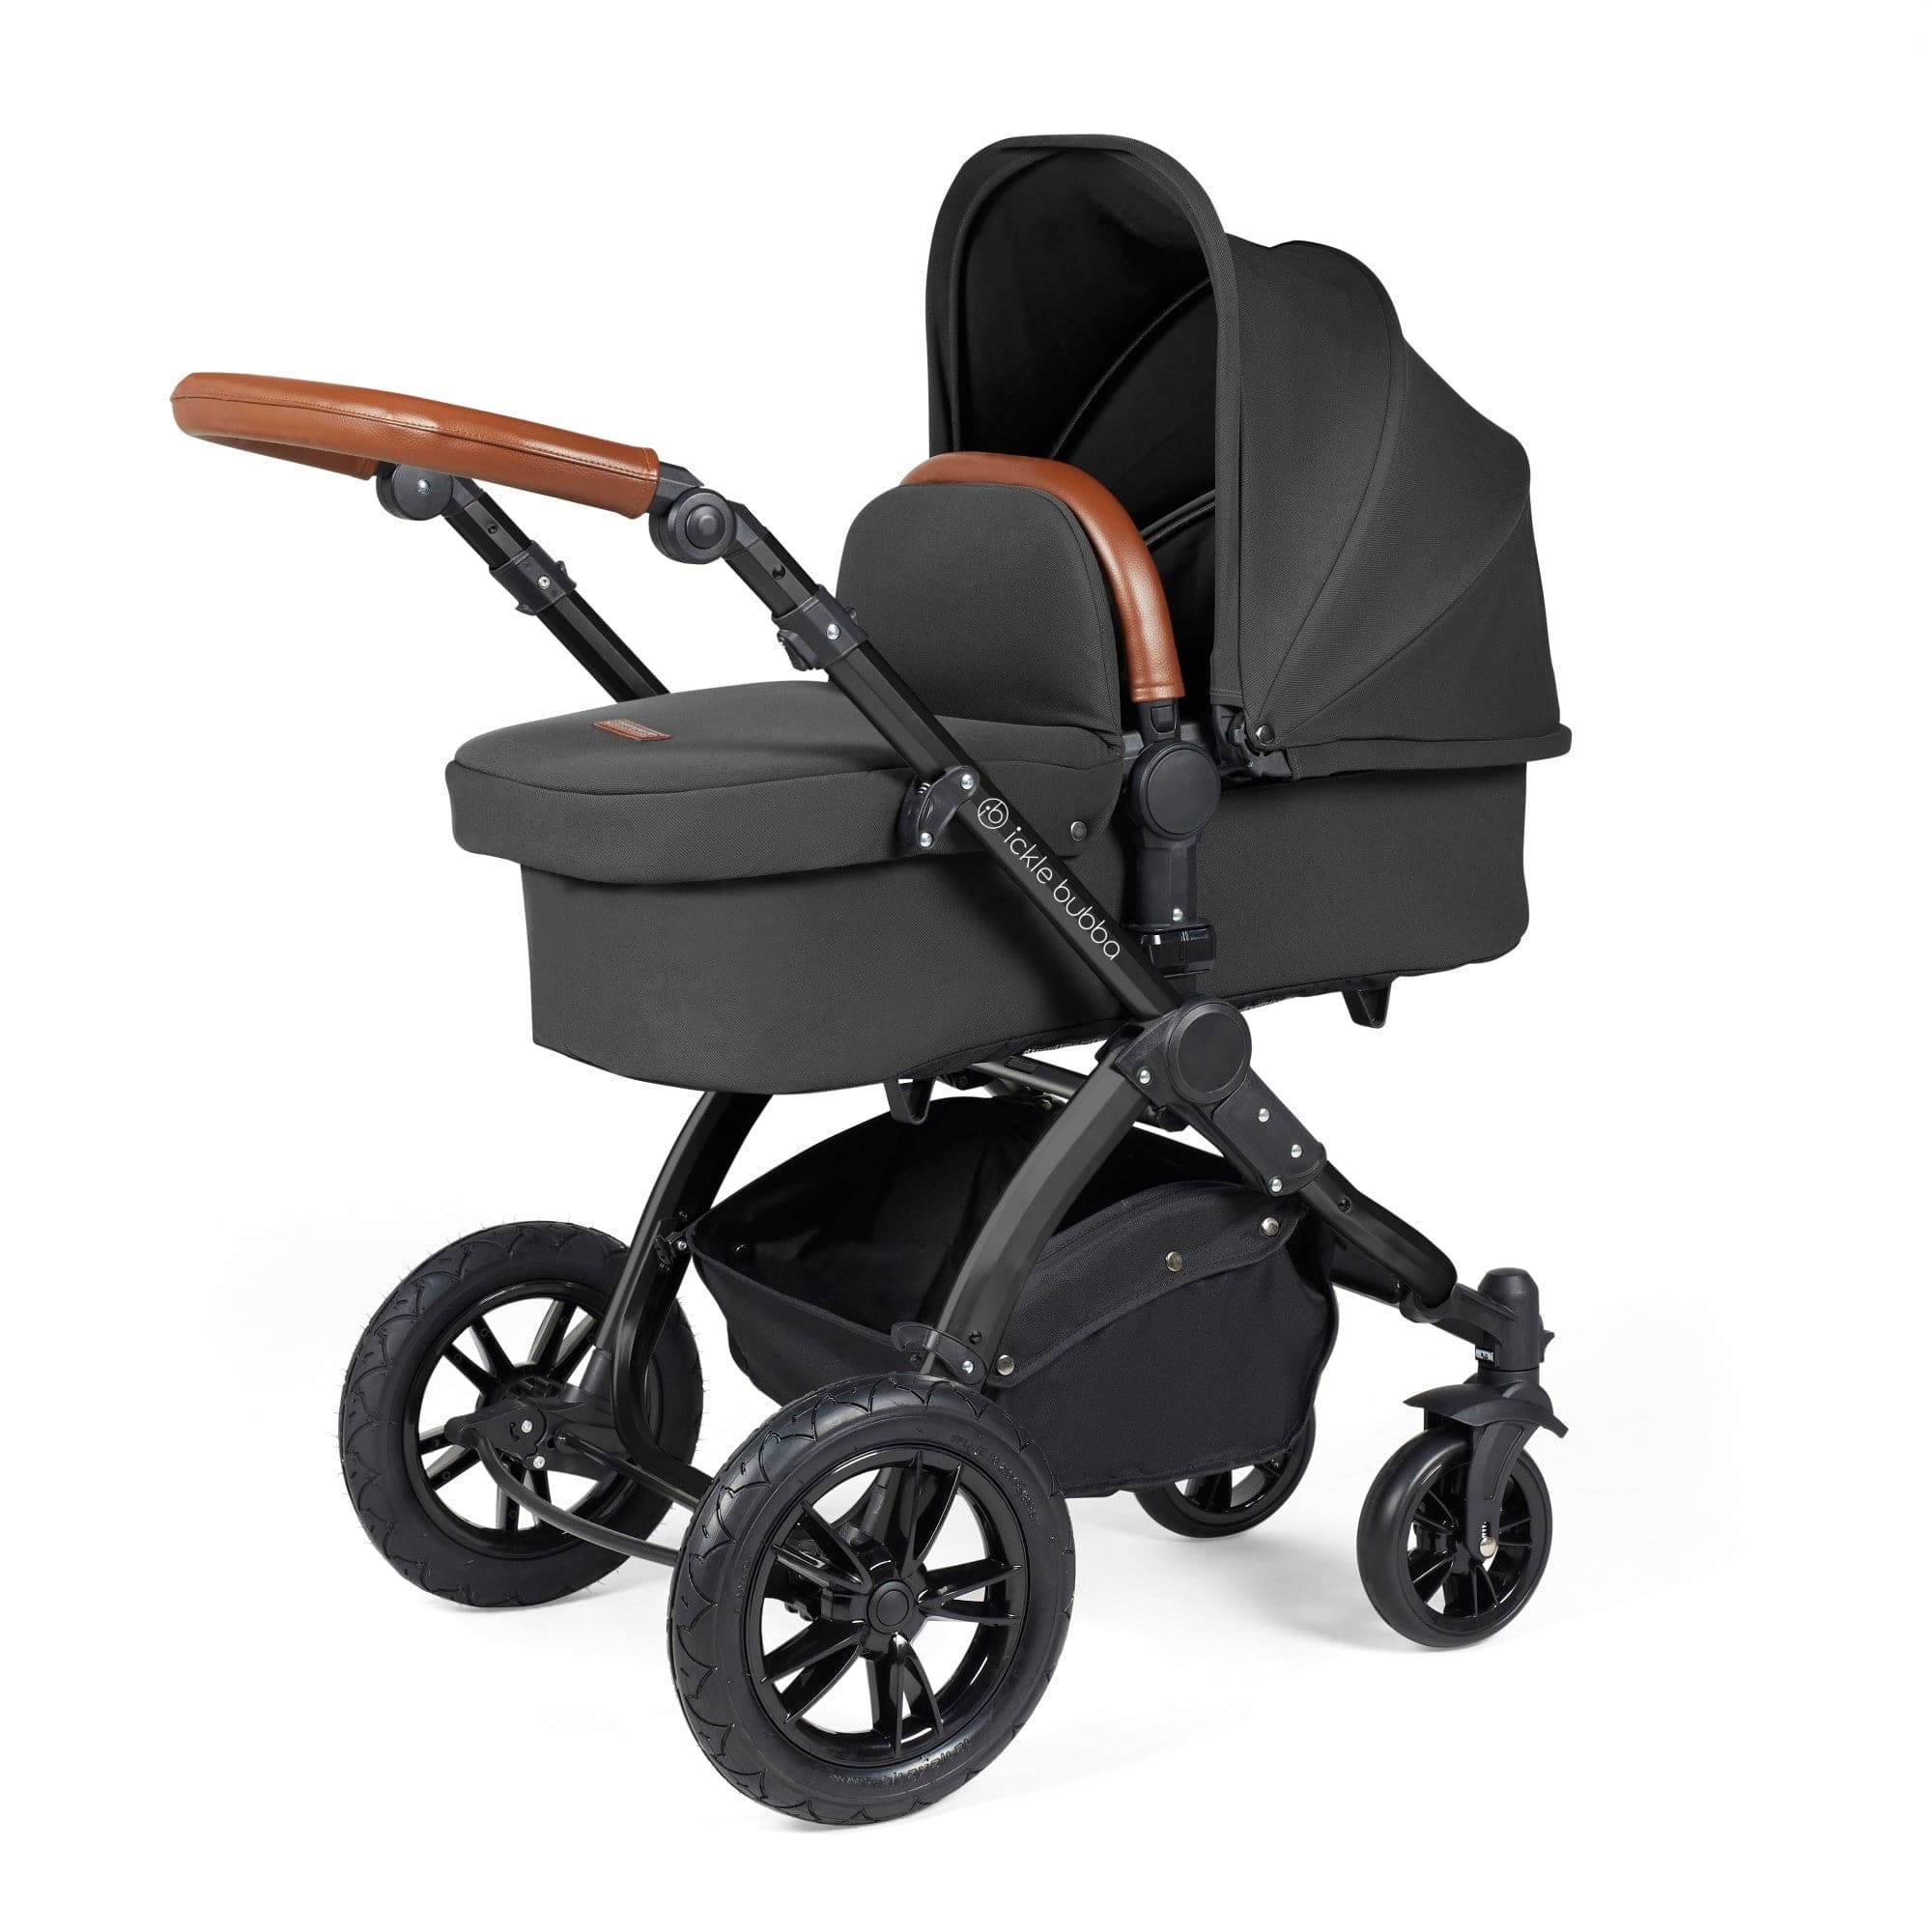 Ickle Bubba Stomp Luxe All-in-One I-Size Travel System With Isofix Base - Black / Charcoal Grey / Tan   